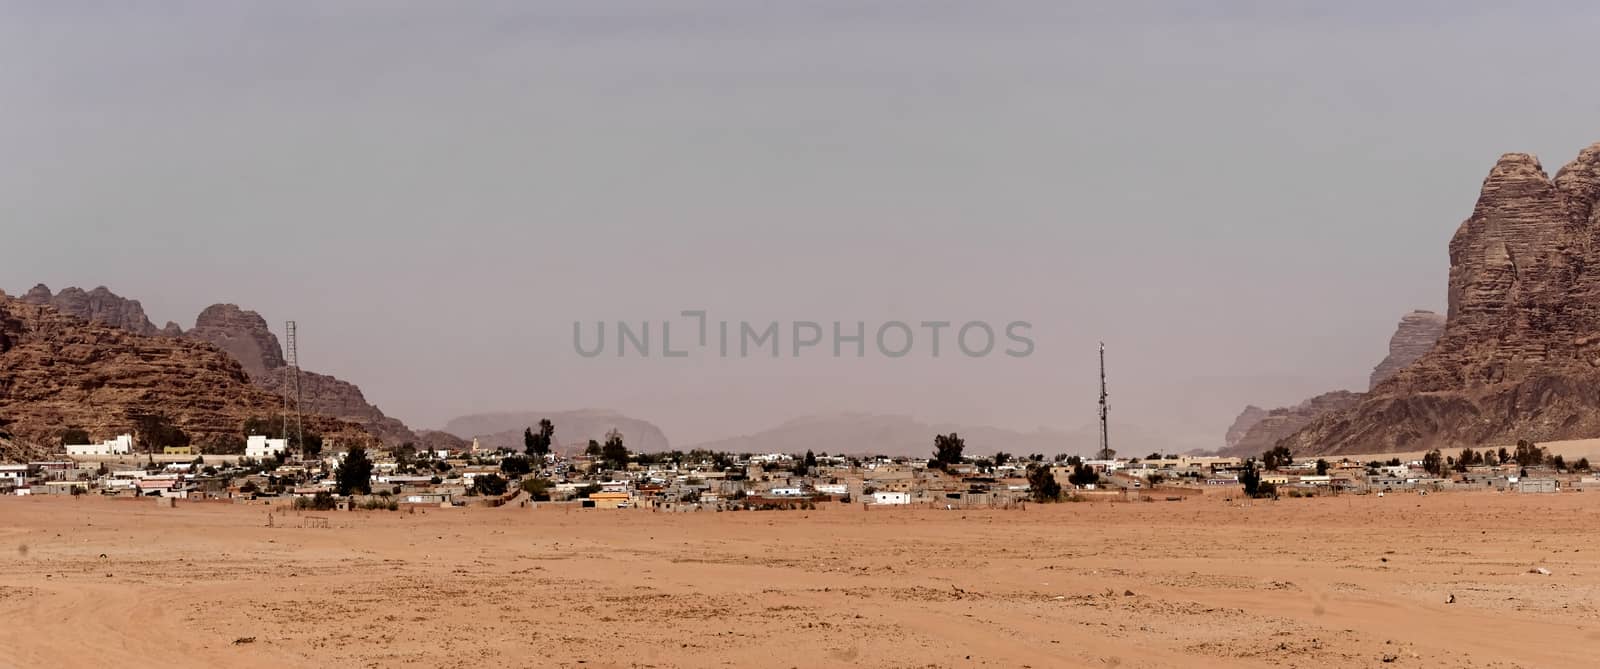 Overview and panorama of the Bedouin village "Wadi Rum Village" on the edge of the Wadi Rum Nature Reserve, Jordan by geogif